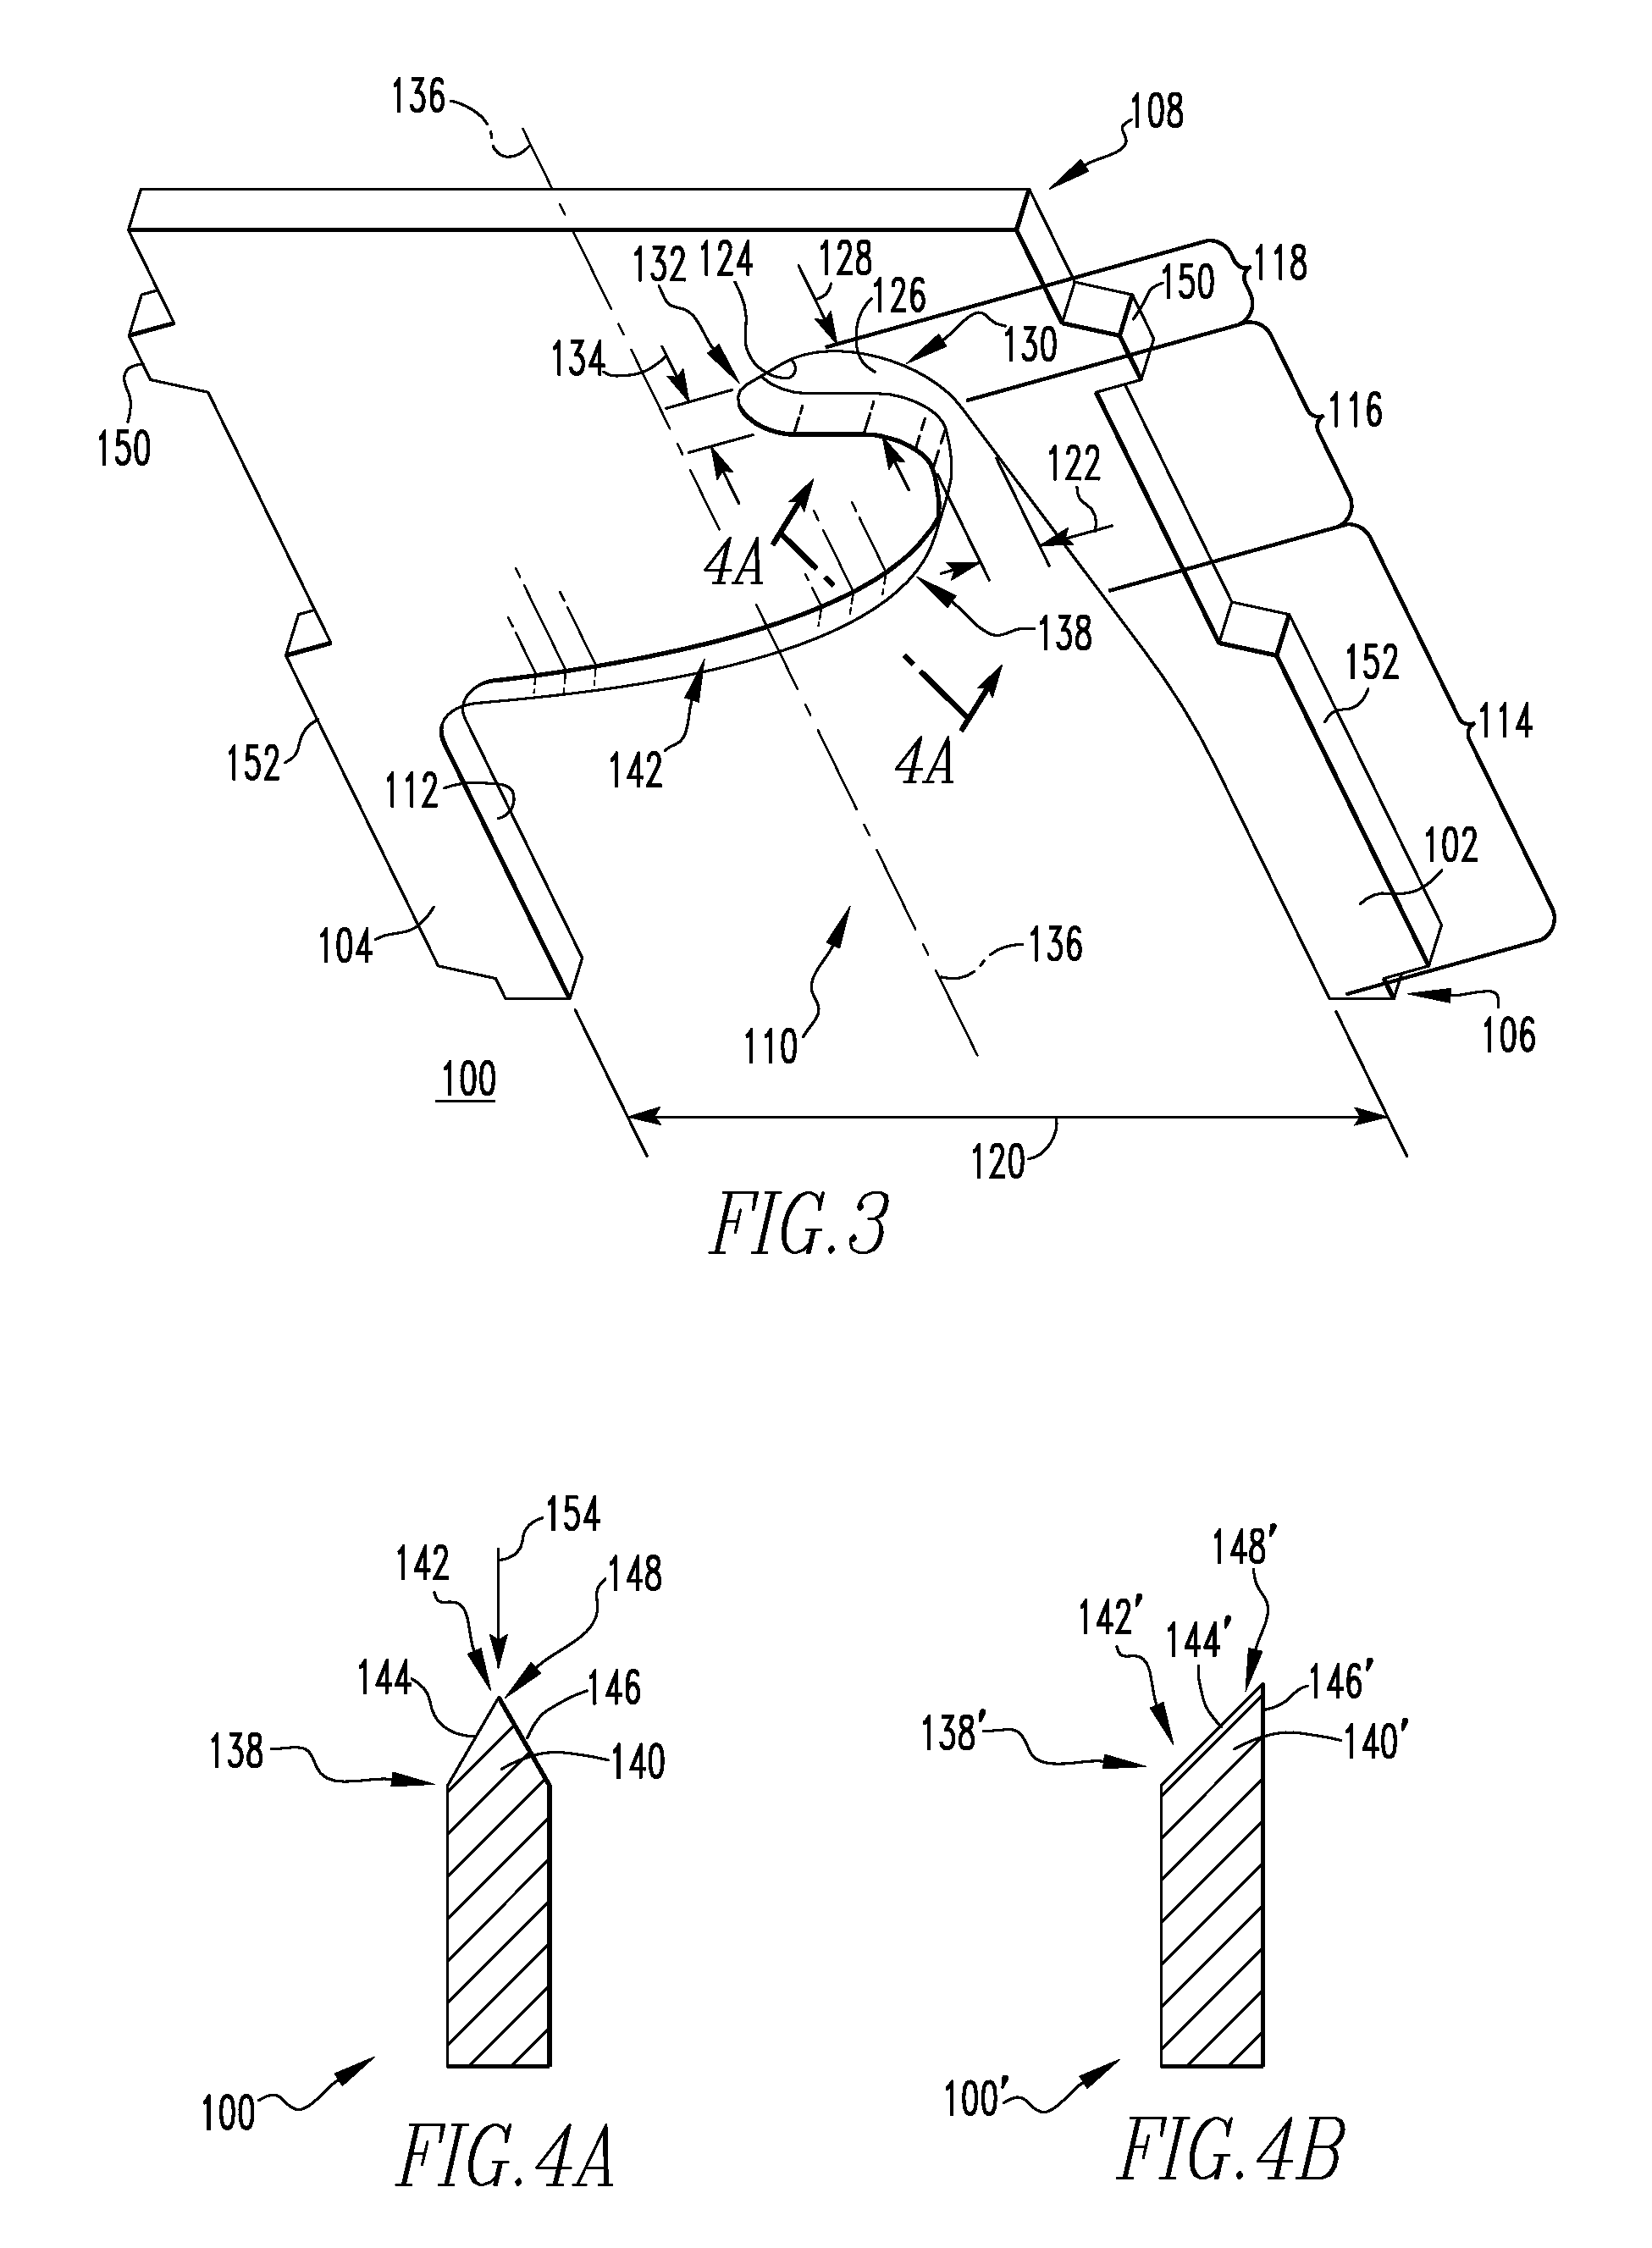 Arc baffle, and arc chute assembly and electrical switching apparatus employing the same